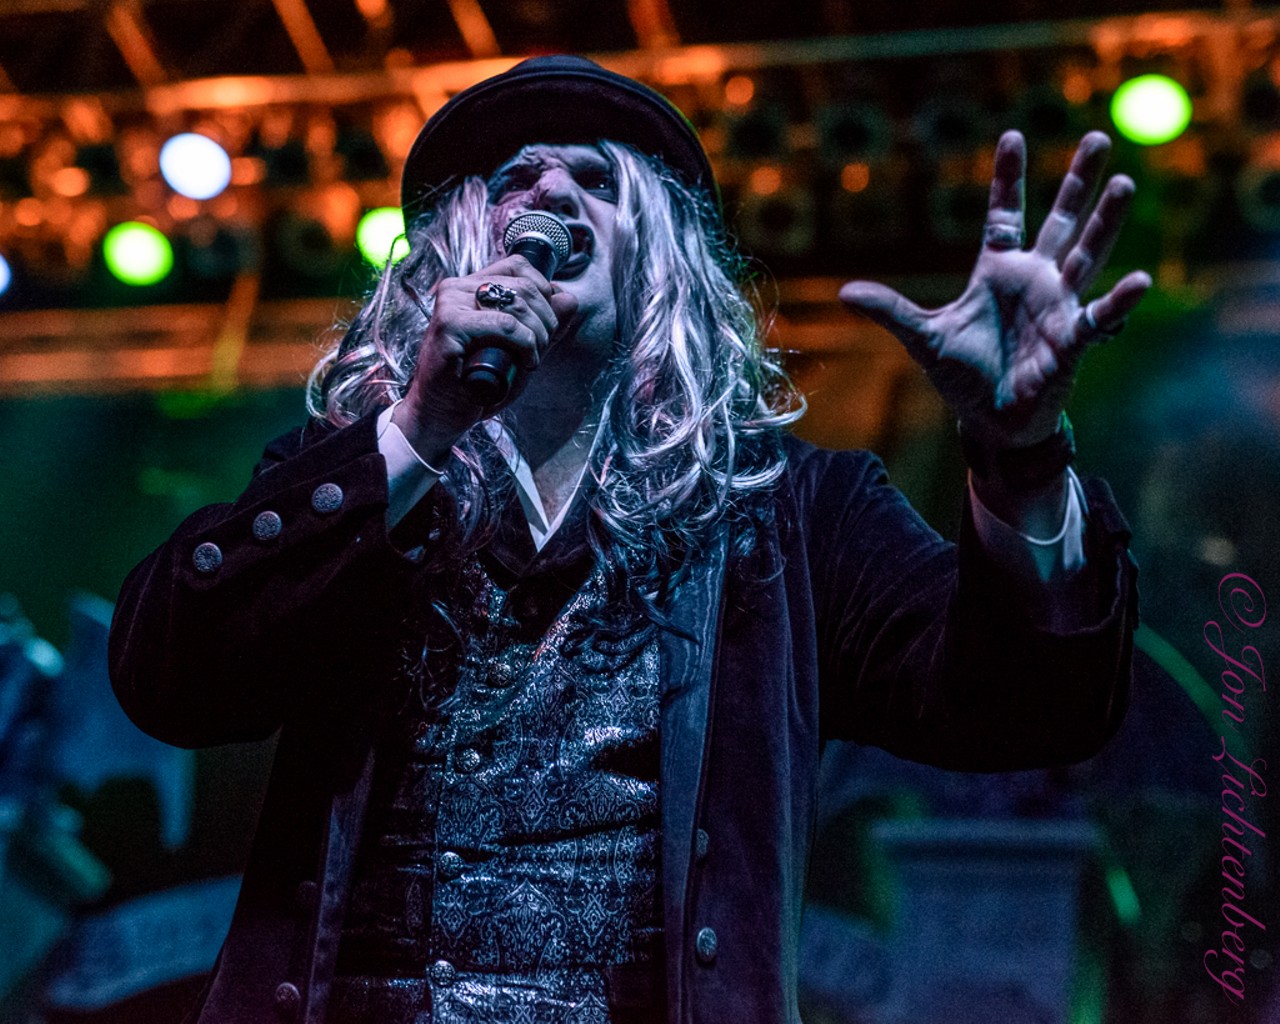 Helloween and Them Performing at the Agora